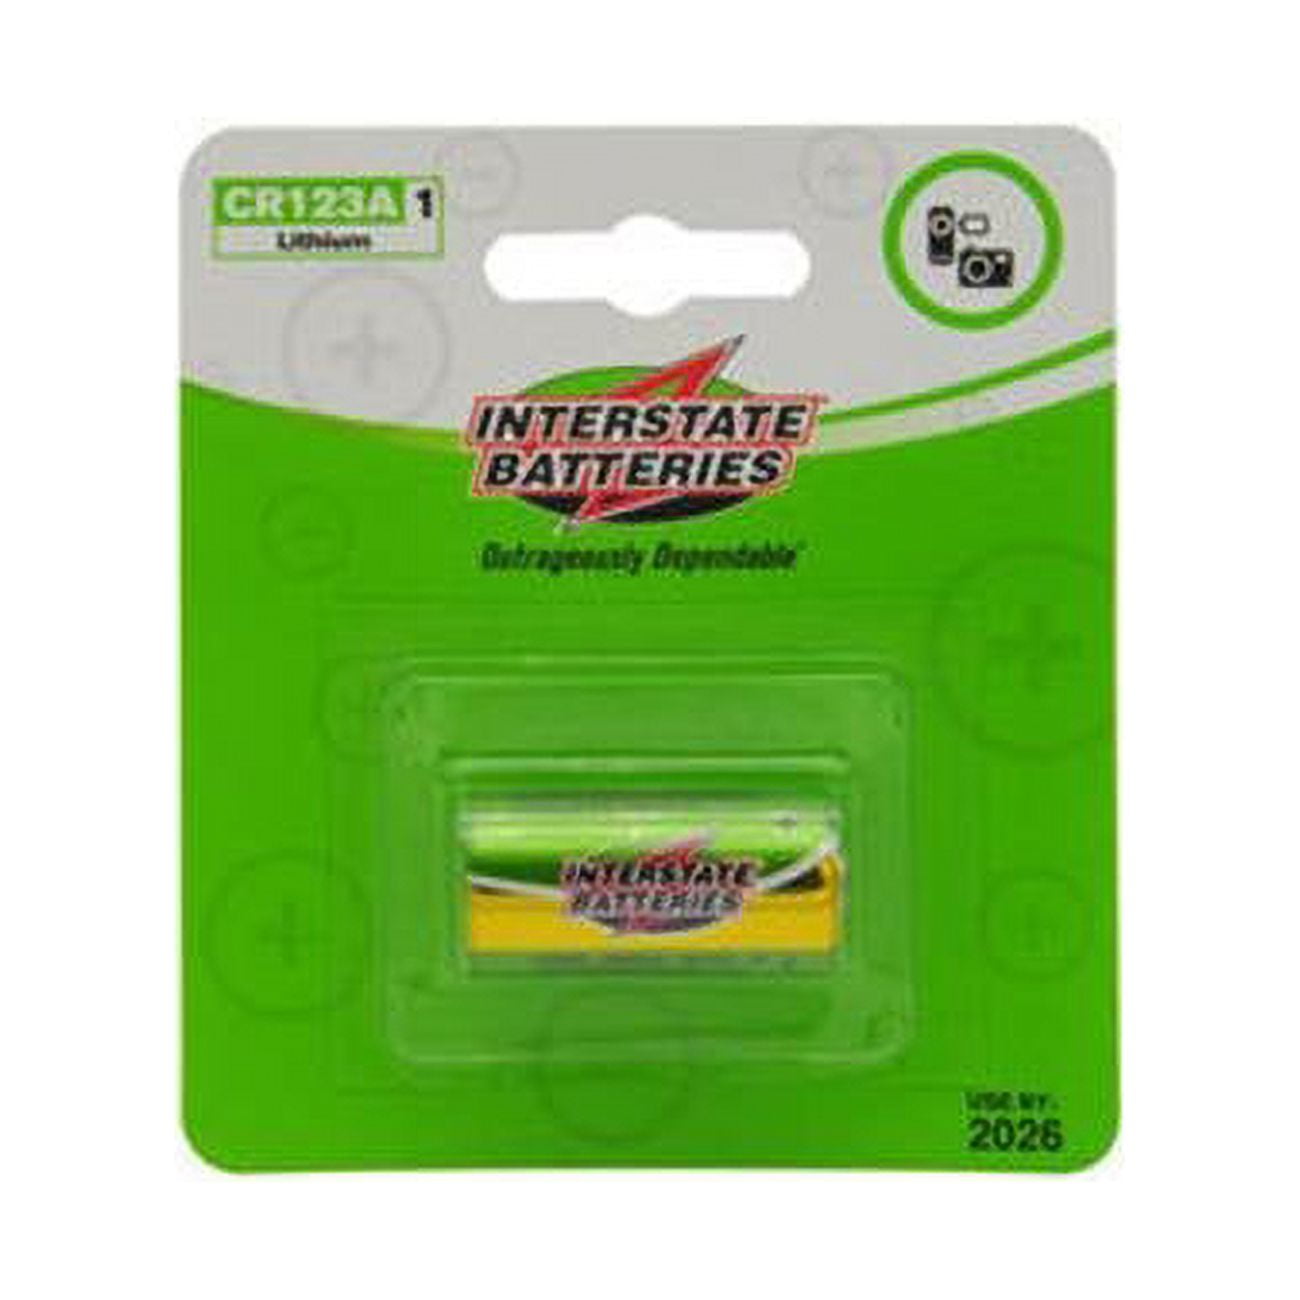 Interstate Batteries PHO0015 3V 1.55AH CR123A Lithium Battery